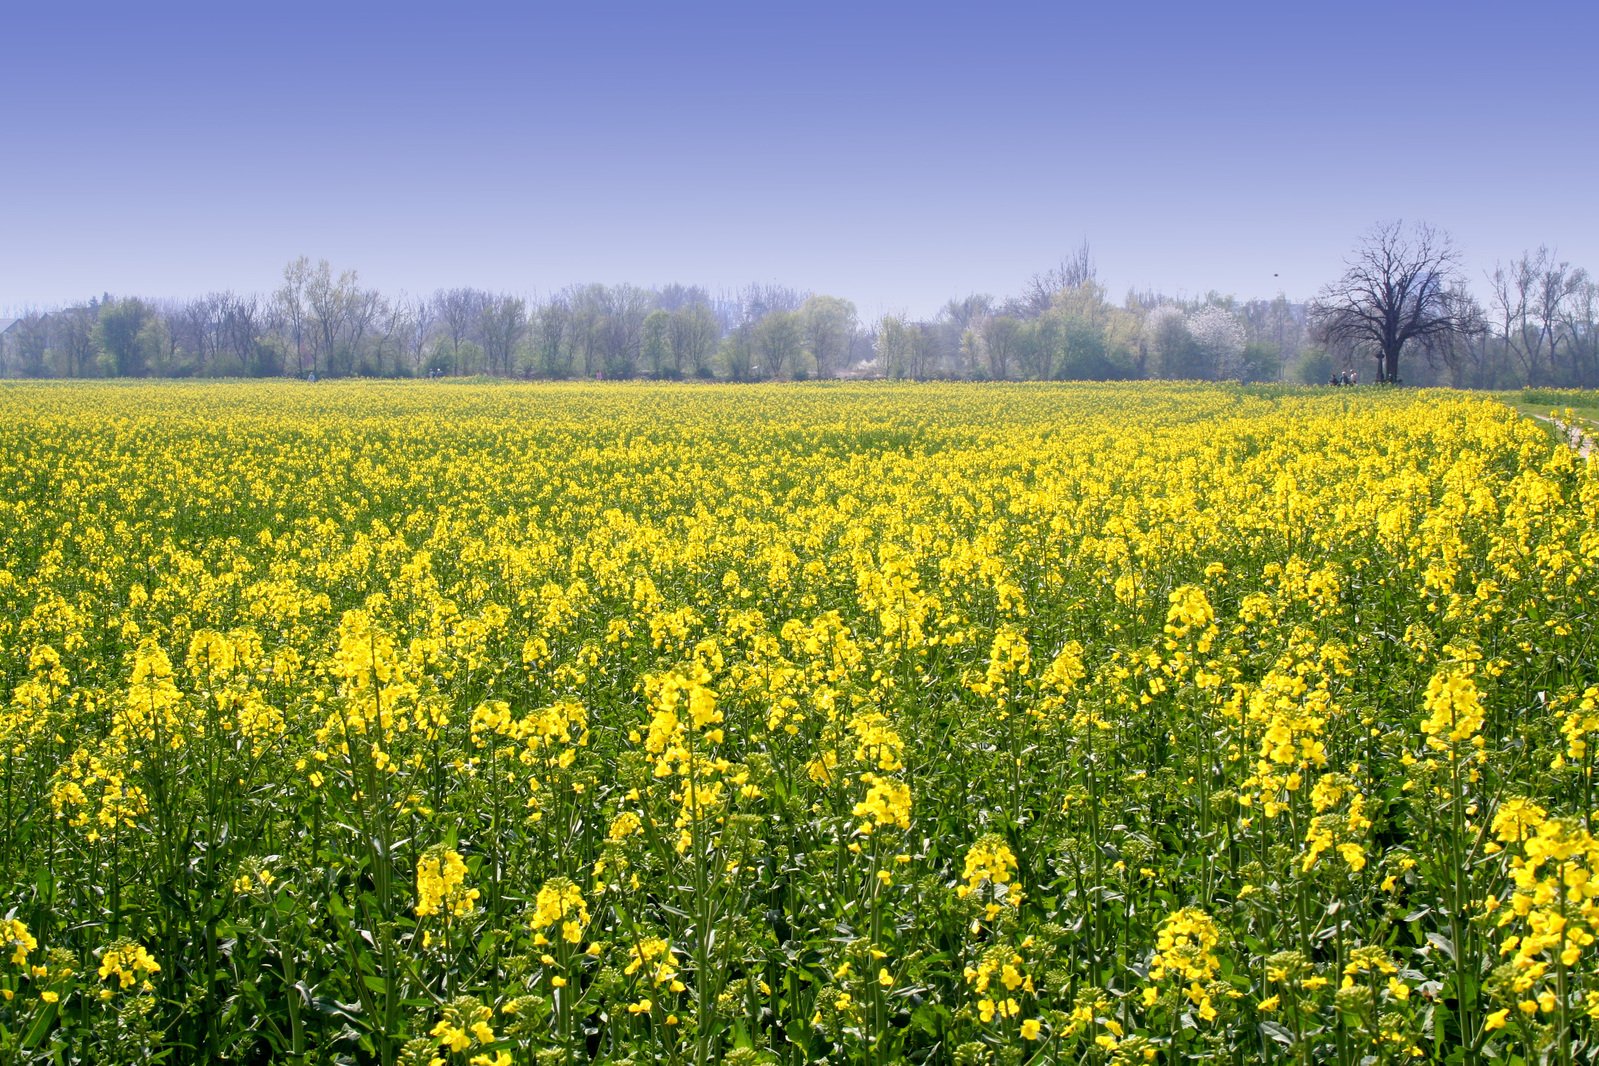 yellow flowers in a field next to trees